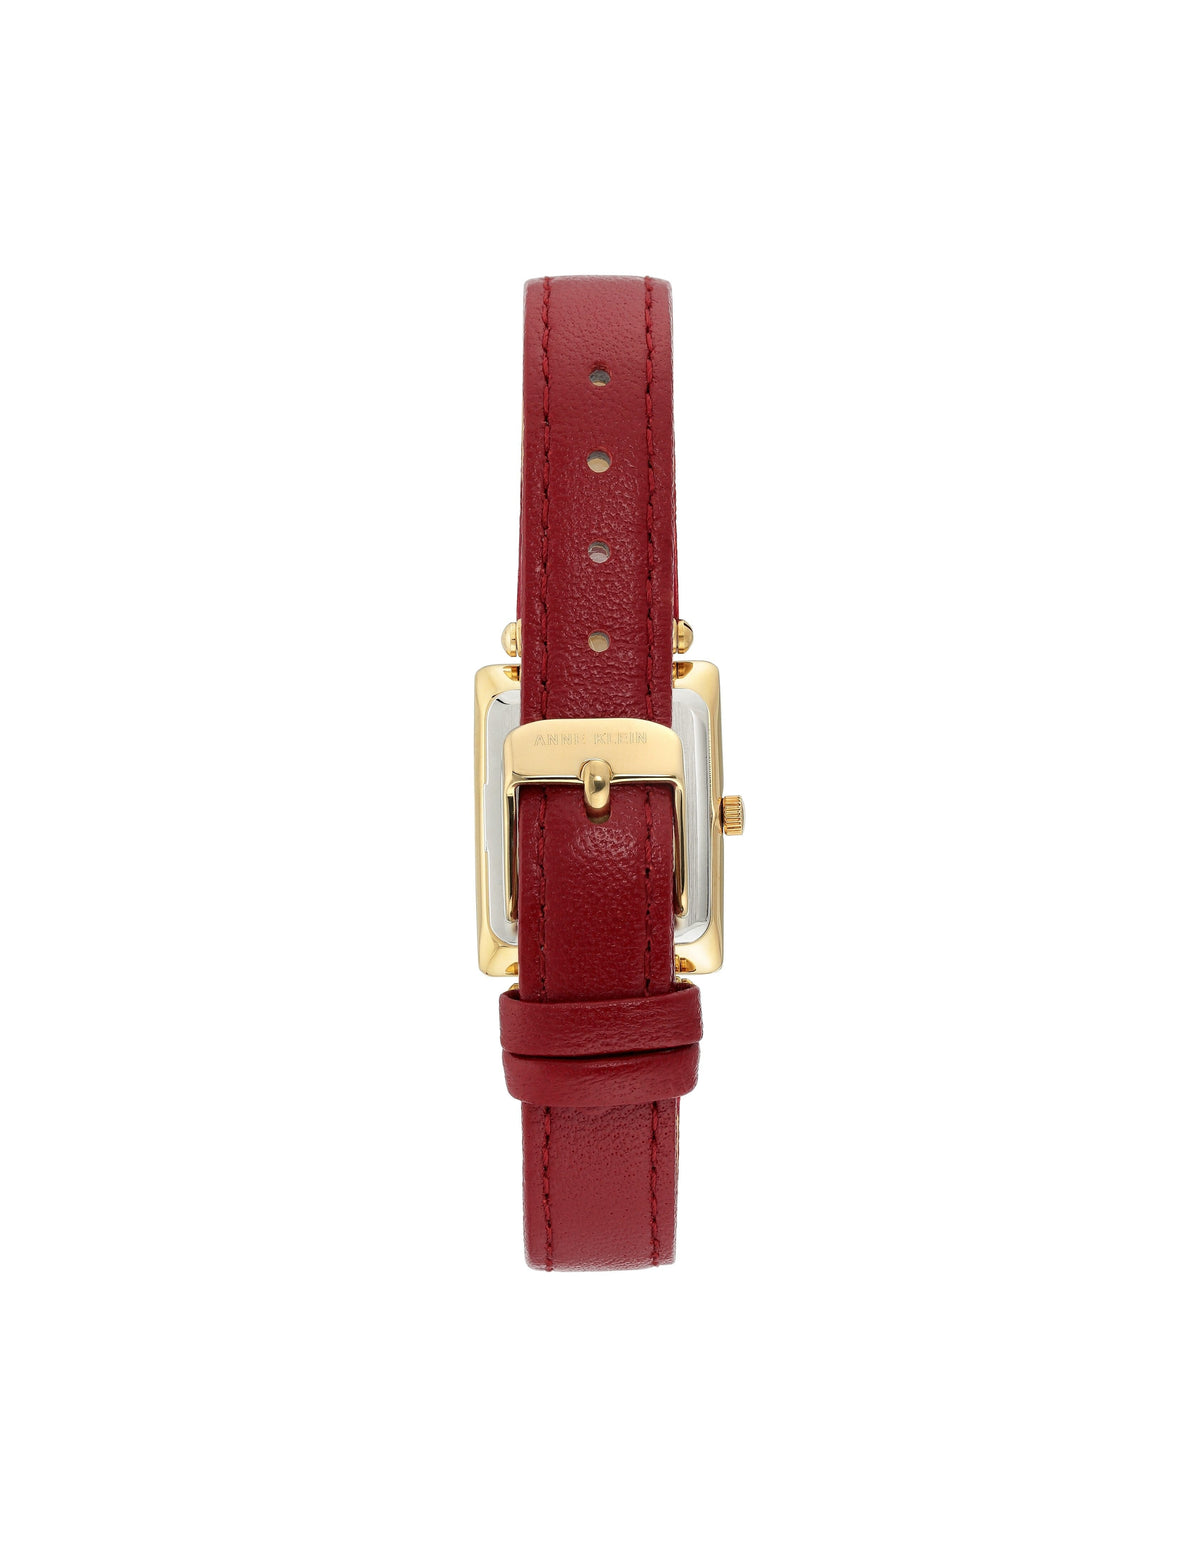 gold-tone red leather strap watch rectangular case